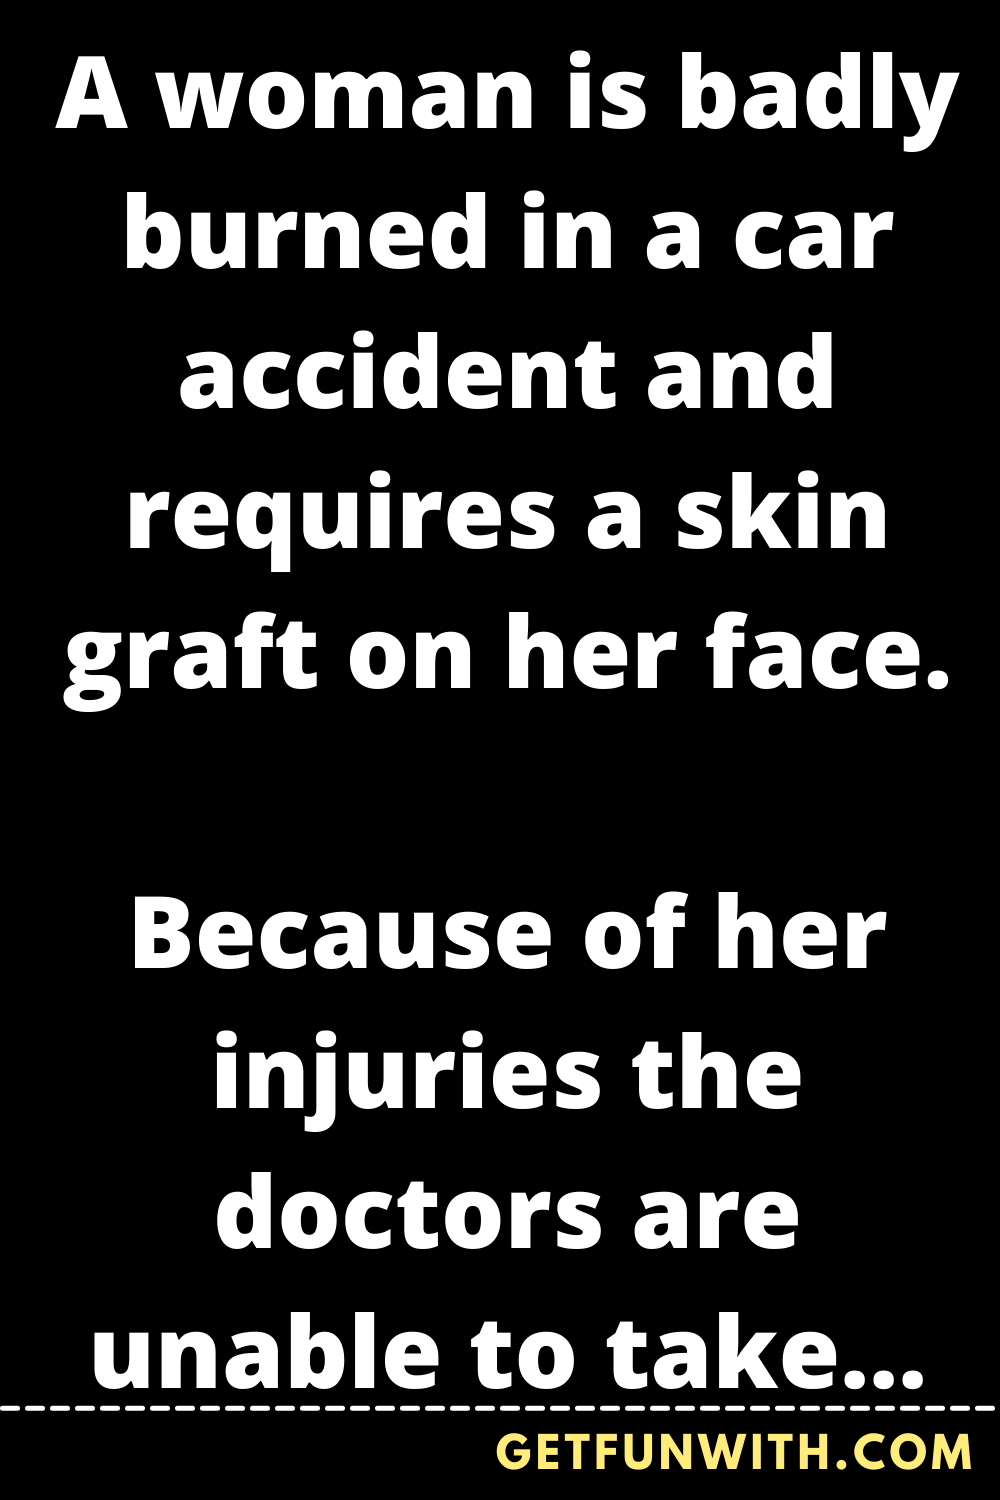 A woman is badly burned in a car accident and requires a skin graft on her face.